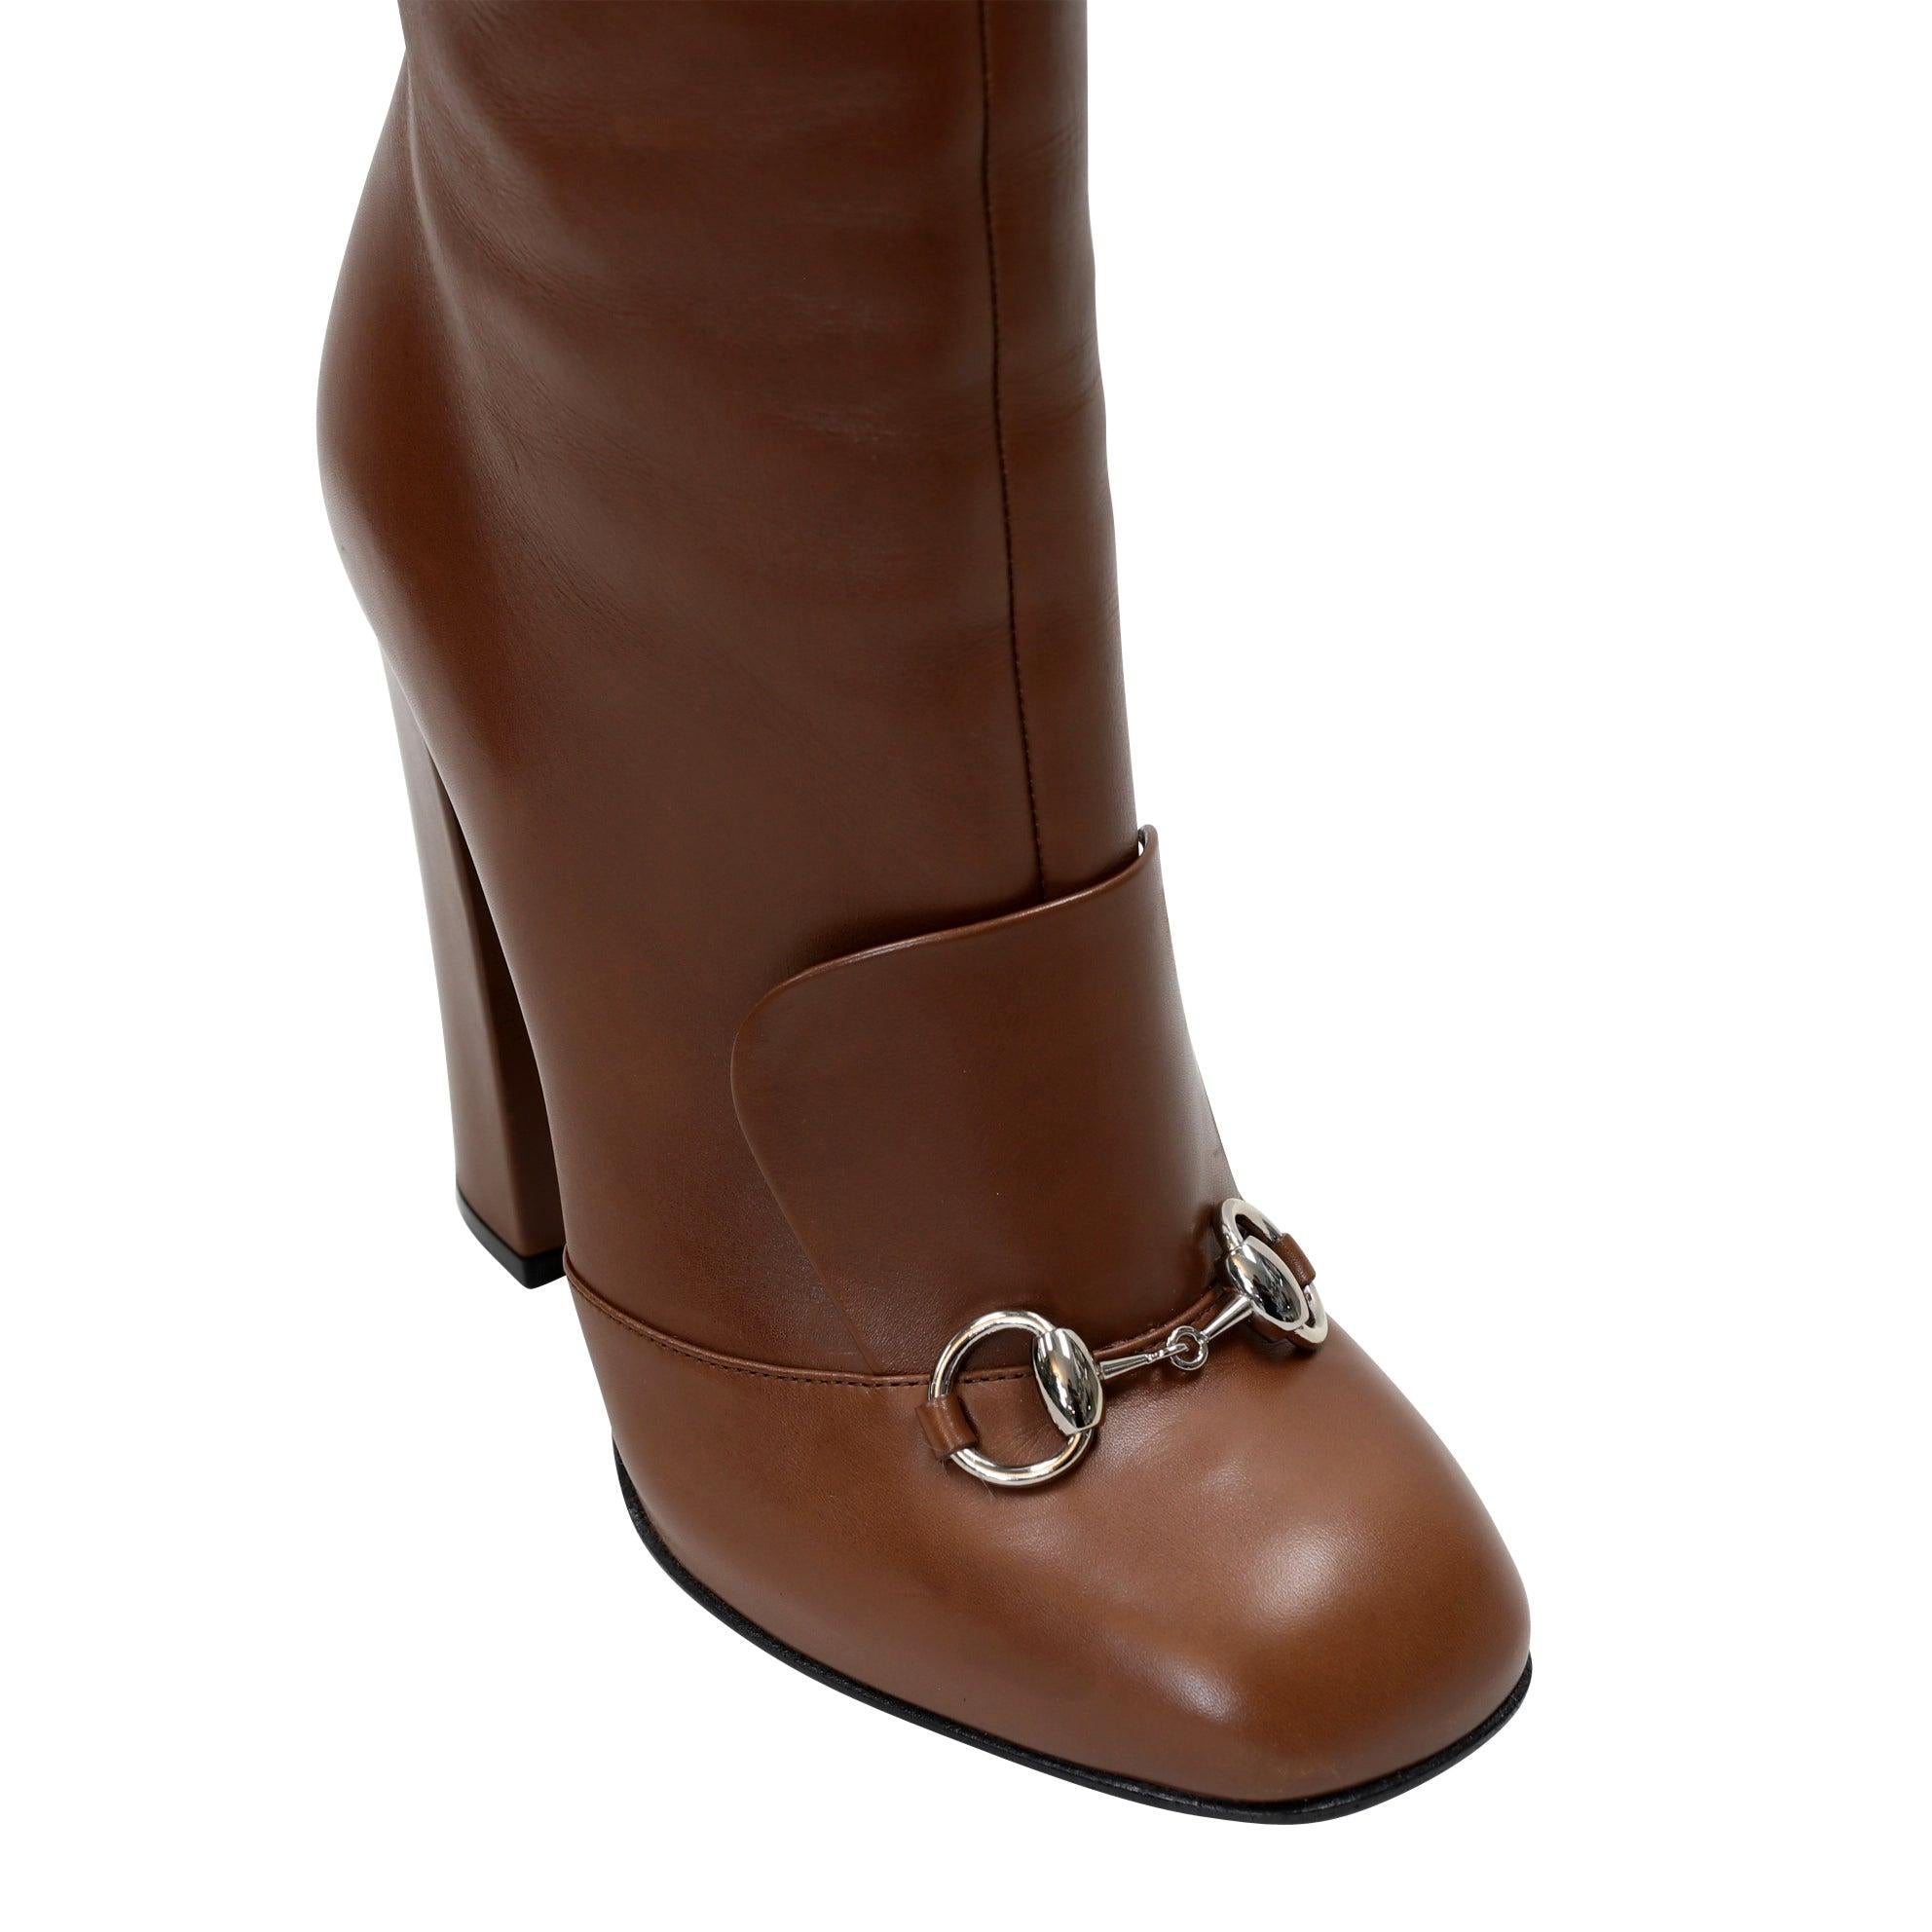 Gucci Brown Leather Horsebit Knee High Riding Boots 39.5 GG-S1111P-0001 For Sale 4